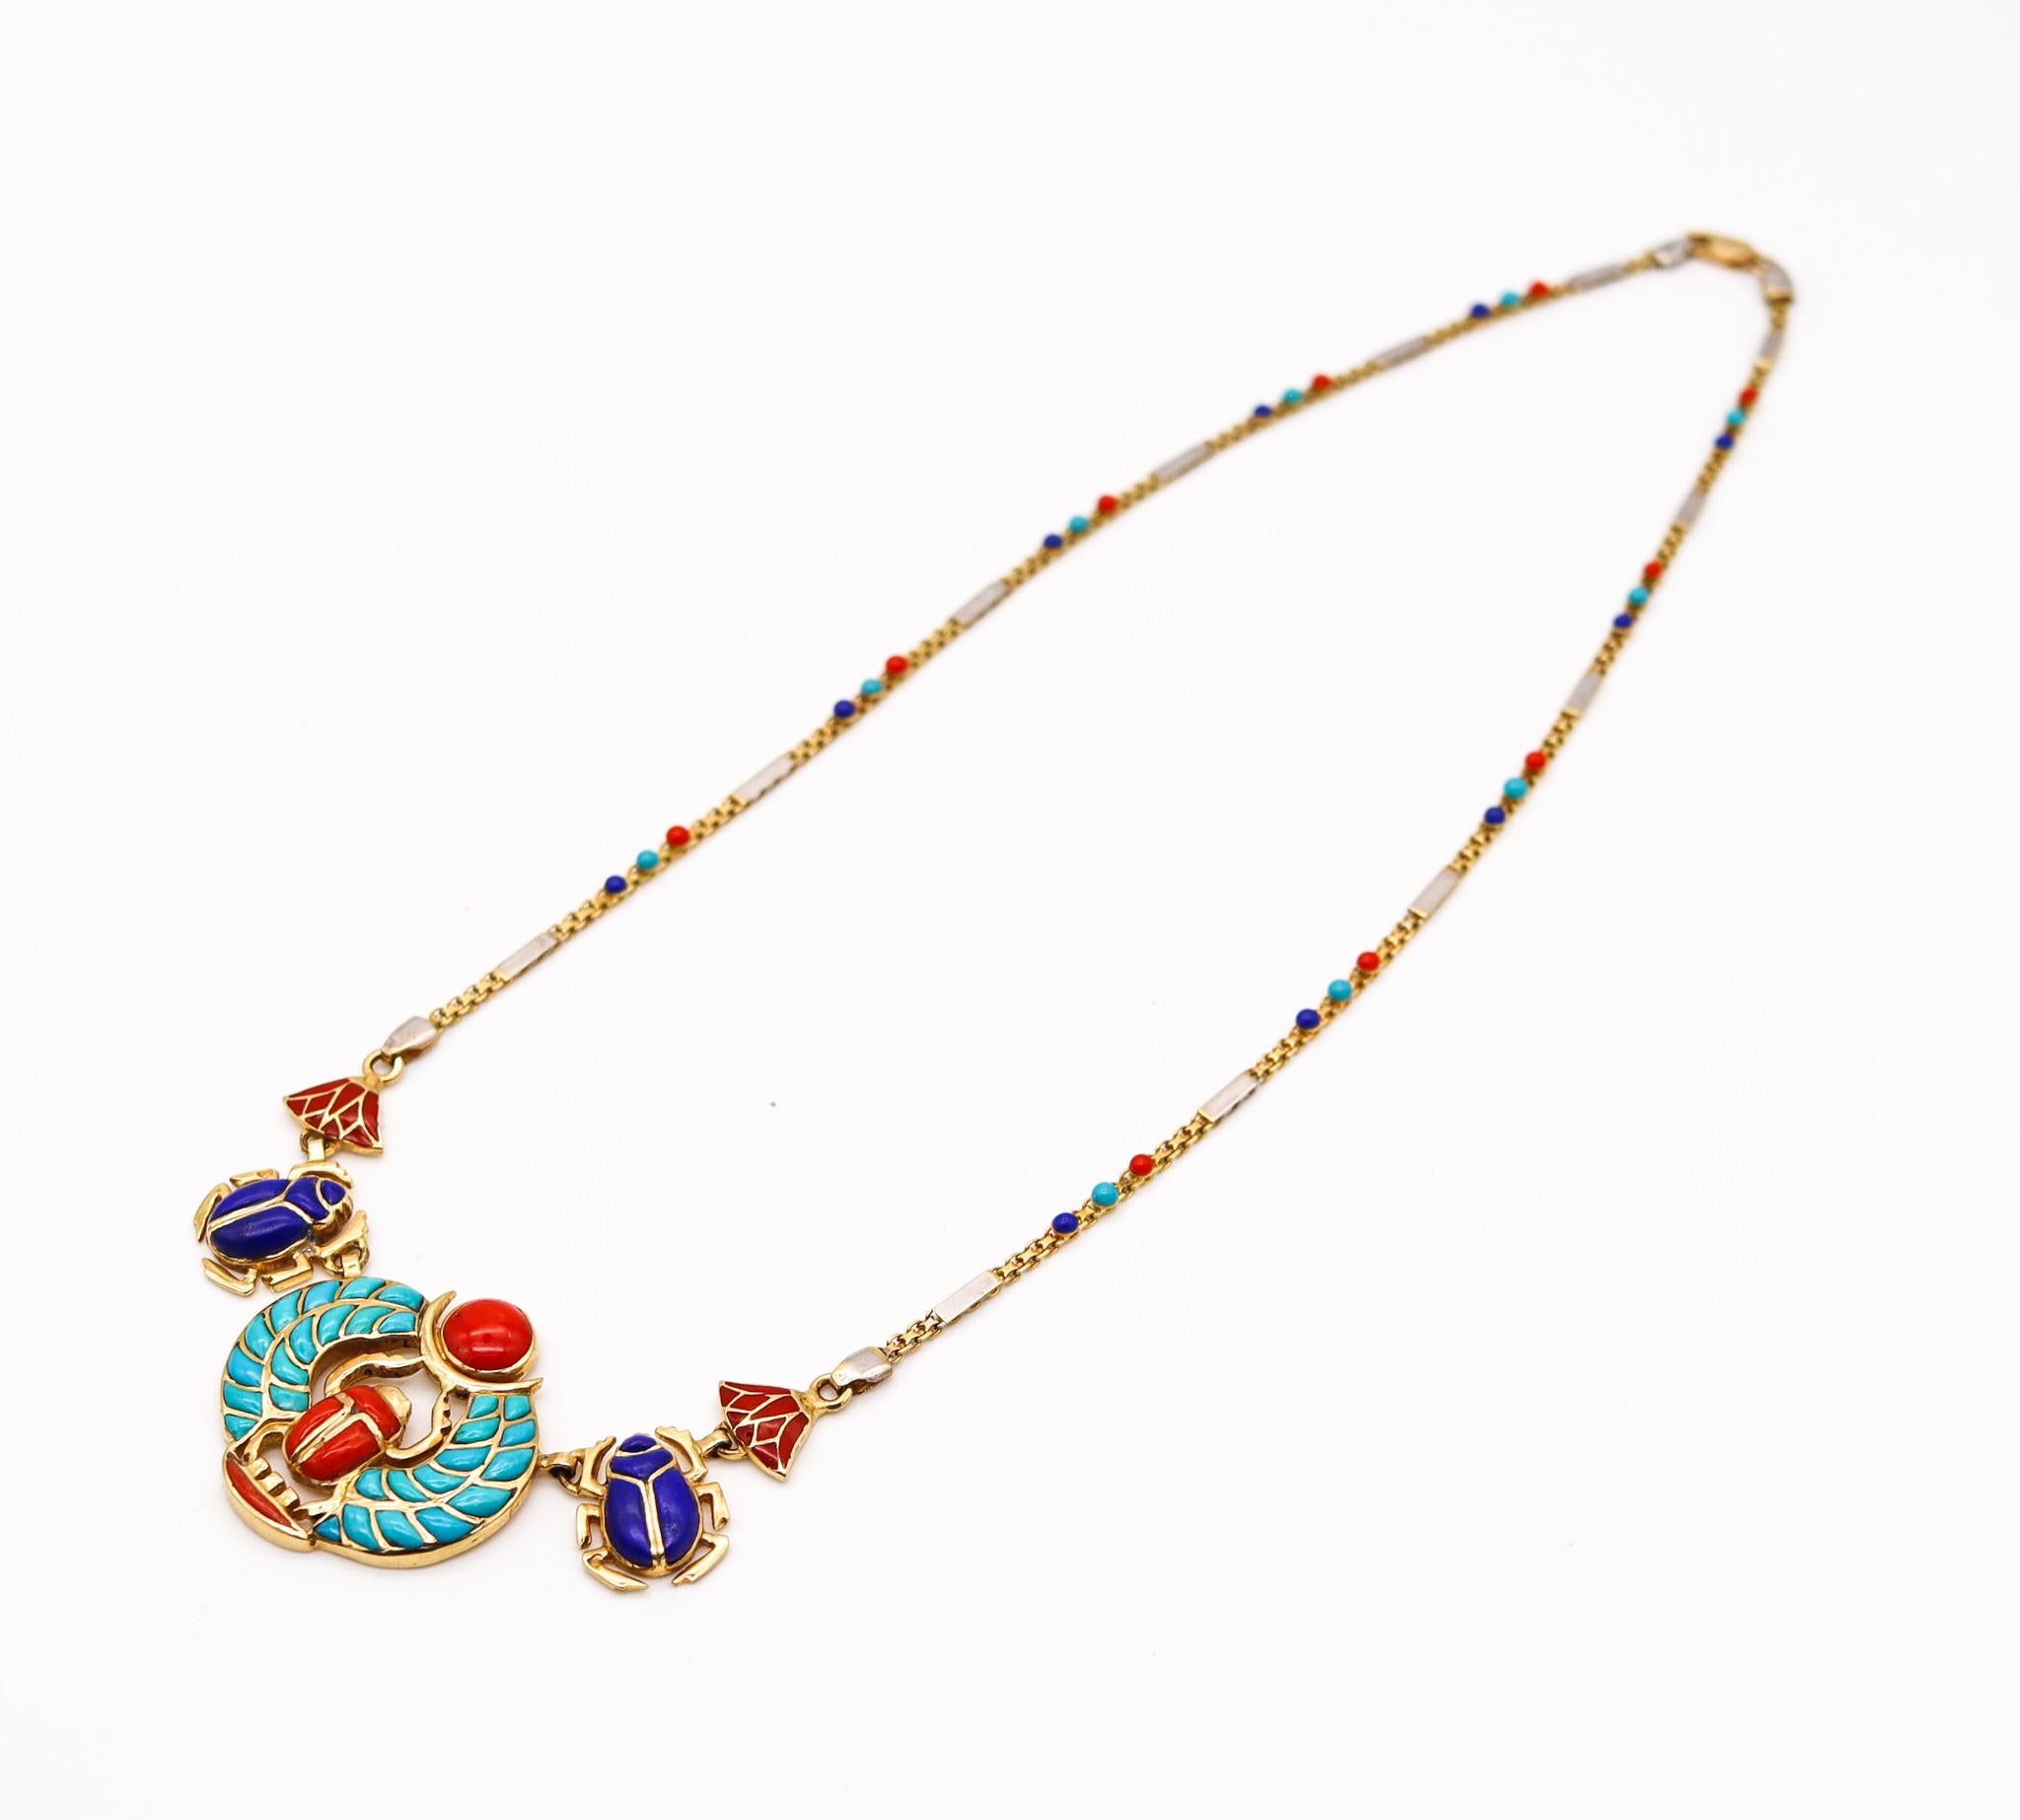 An Egyptian revival king Tut Khepri Scarab necklace

Beautiful colorful piece made with Egyptian motifs from the ancient kingdom of the Pharaohs. The dominant part is the figure of the sacred scarab with the feathers of the god Khepri flanked by two